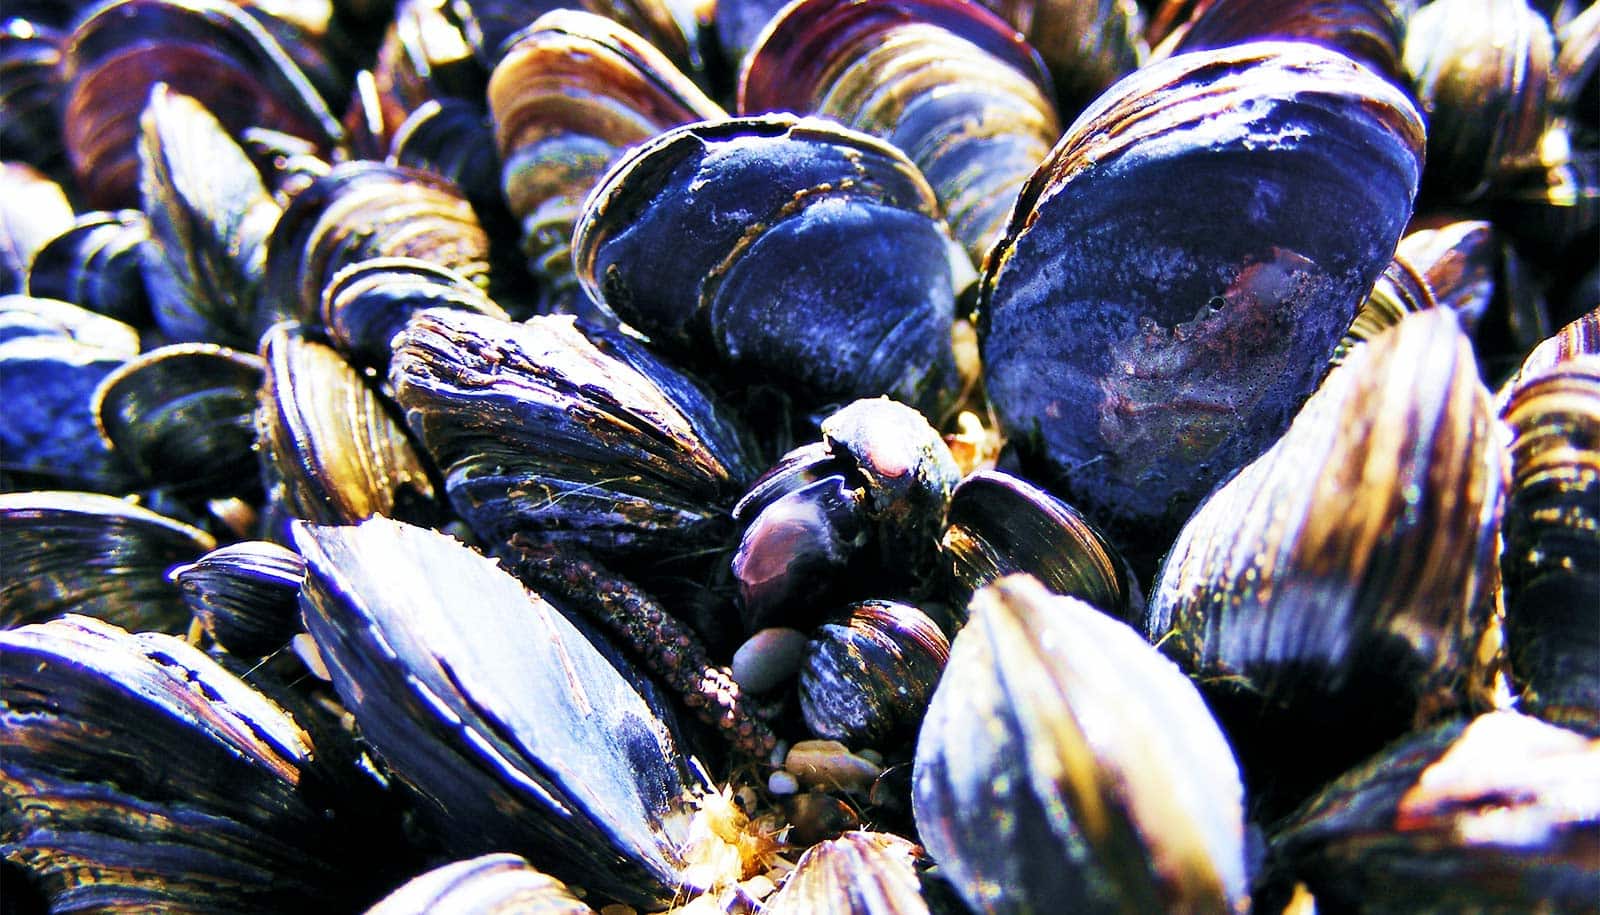 Many mussels in shells sitting on a shore.